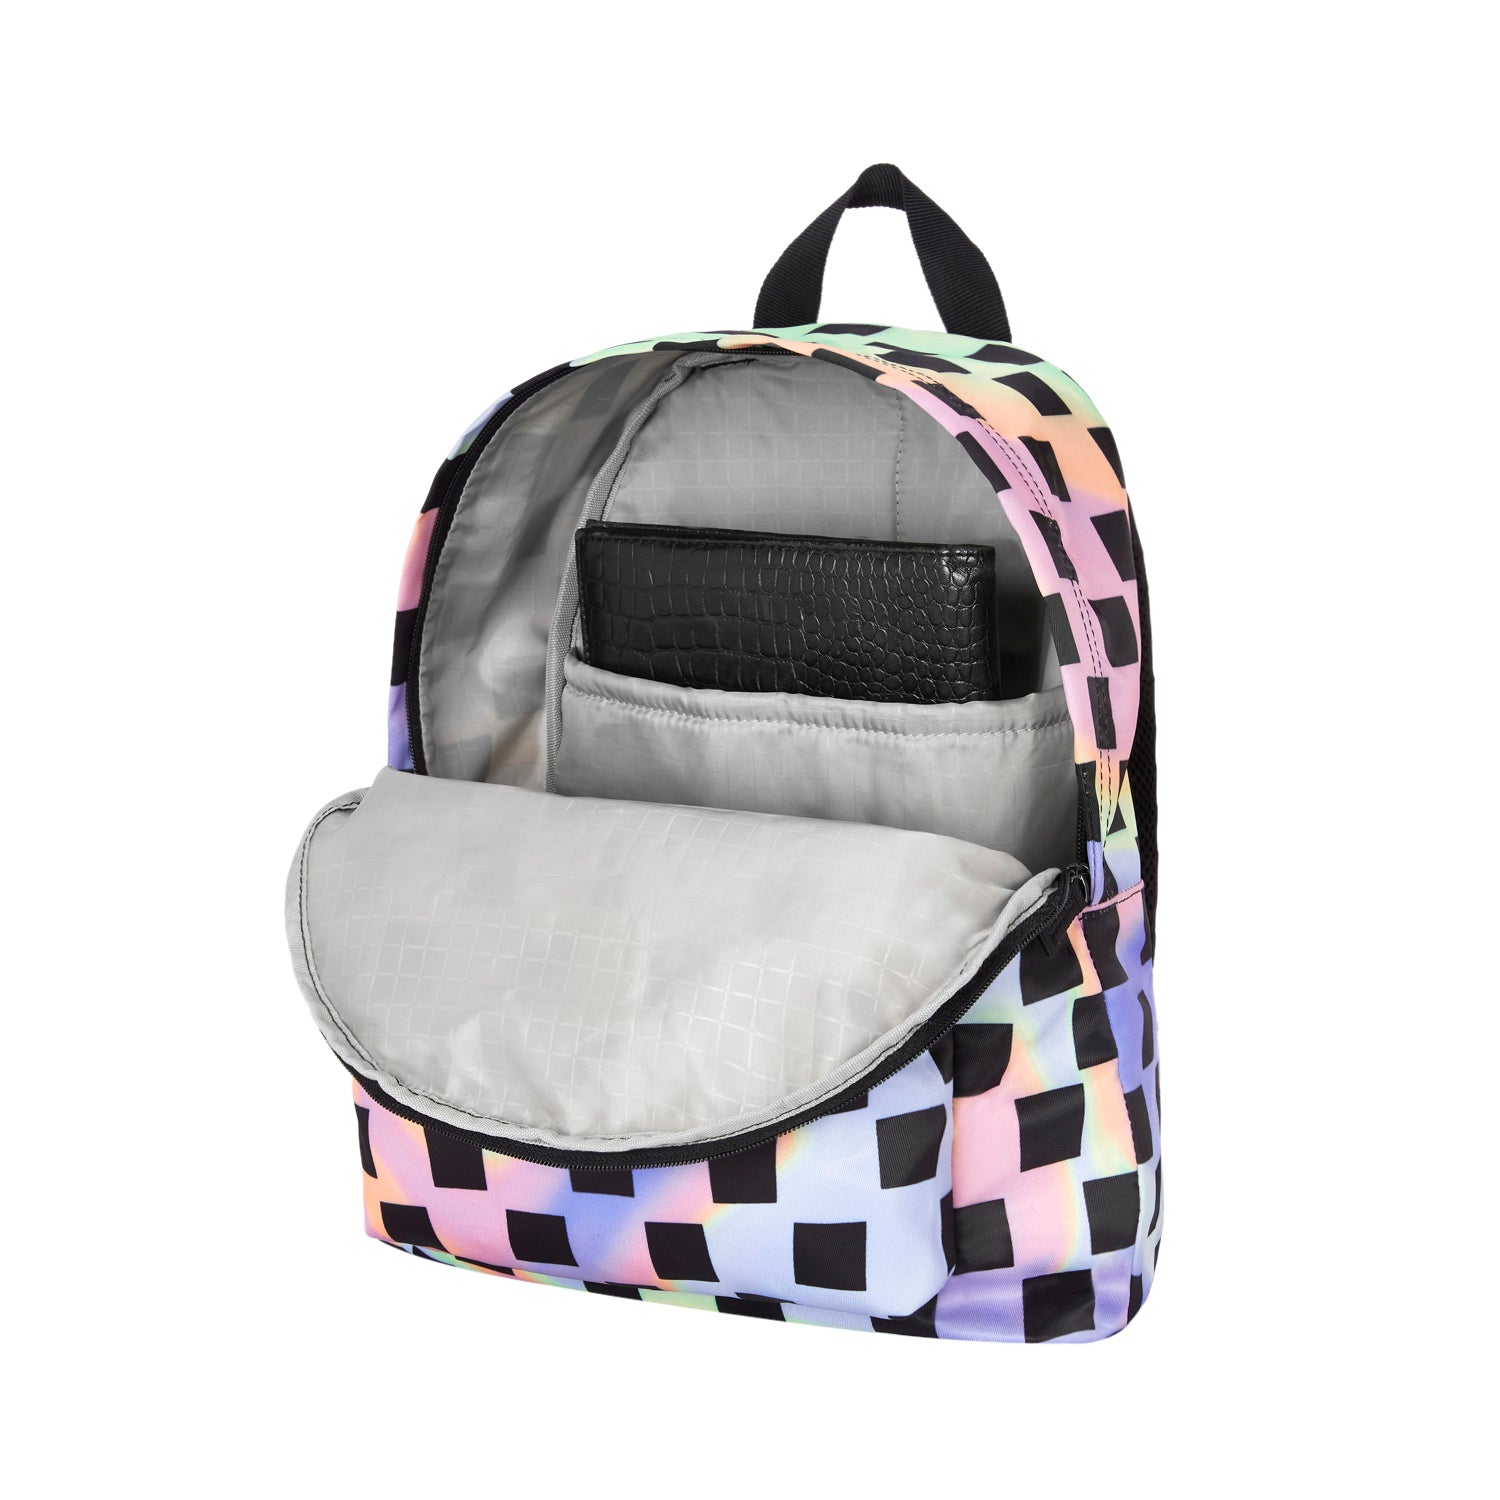 Iridescence Small Laptop Daypack - Multicolor